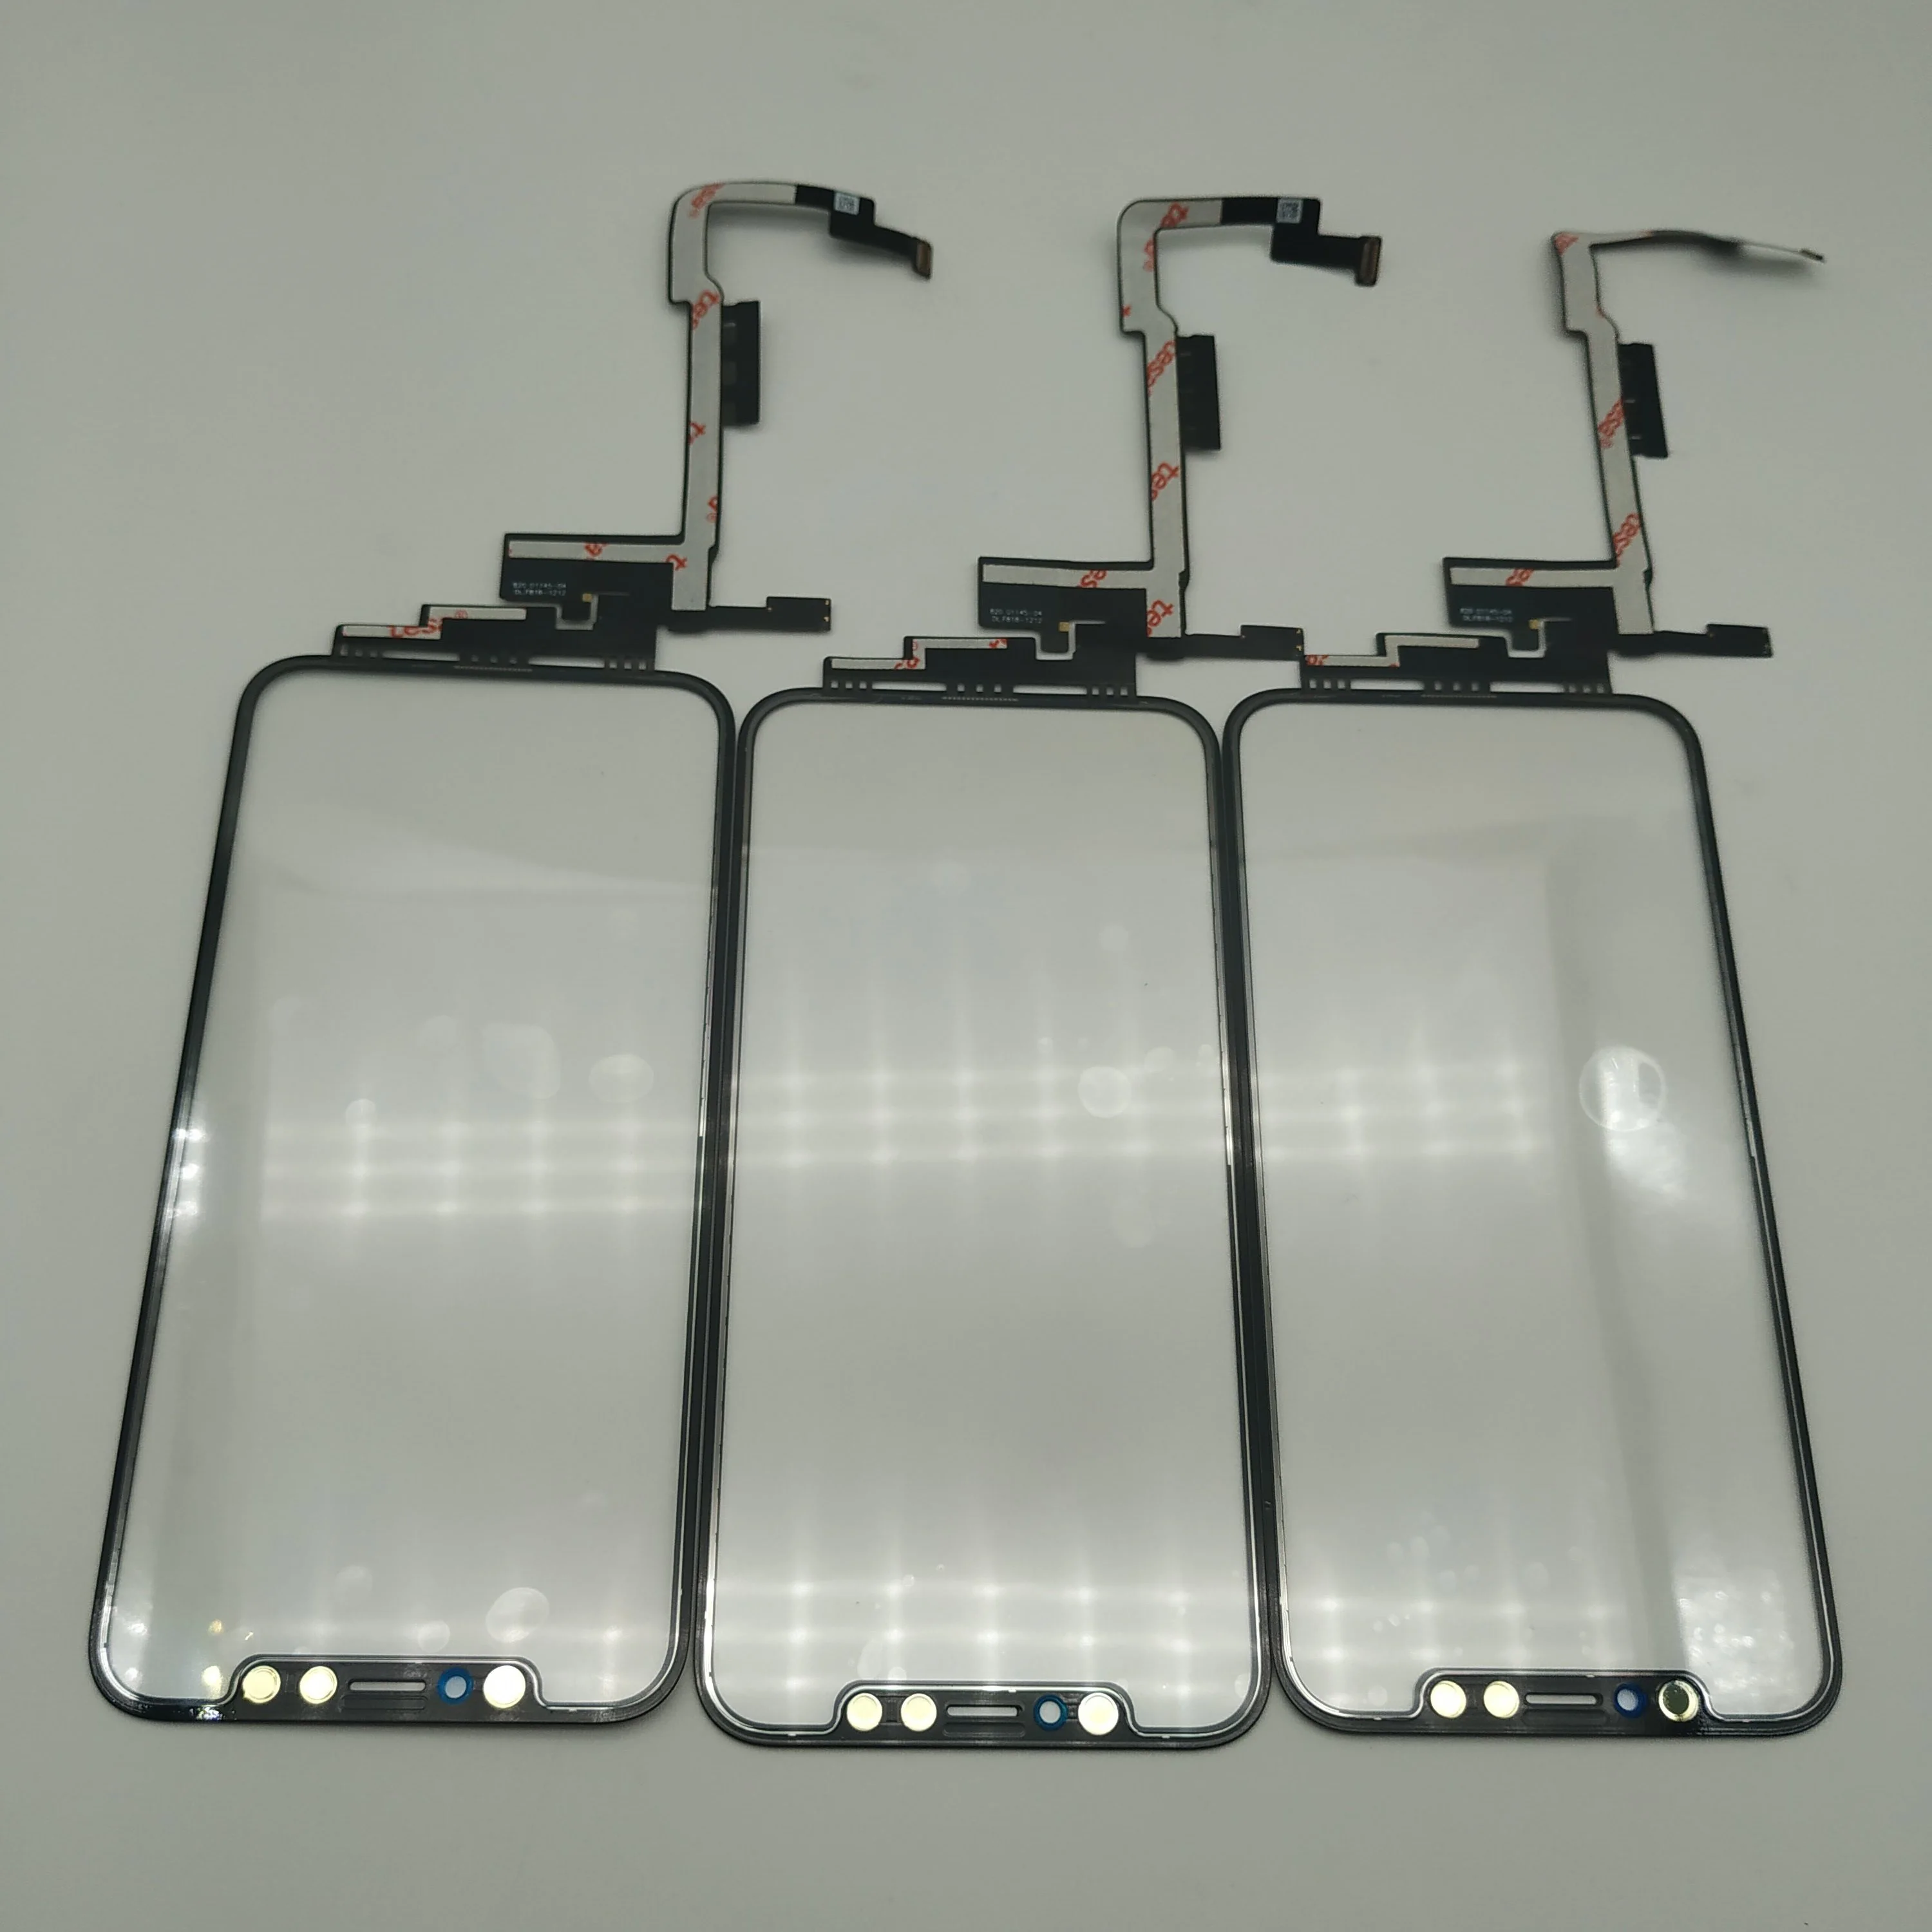 5pcs Copy original glass+touch+oca For Phone x digitized glass touch panel replacement phone repair no need welding